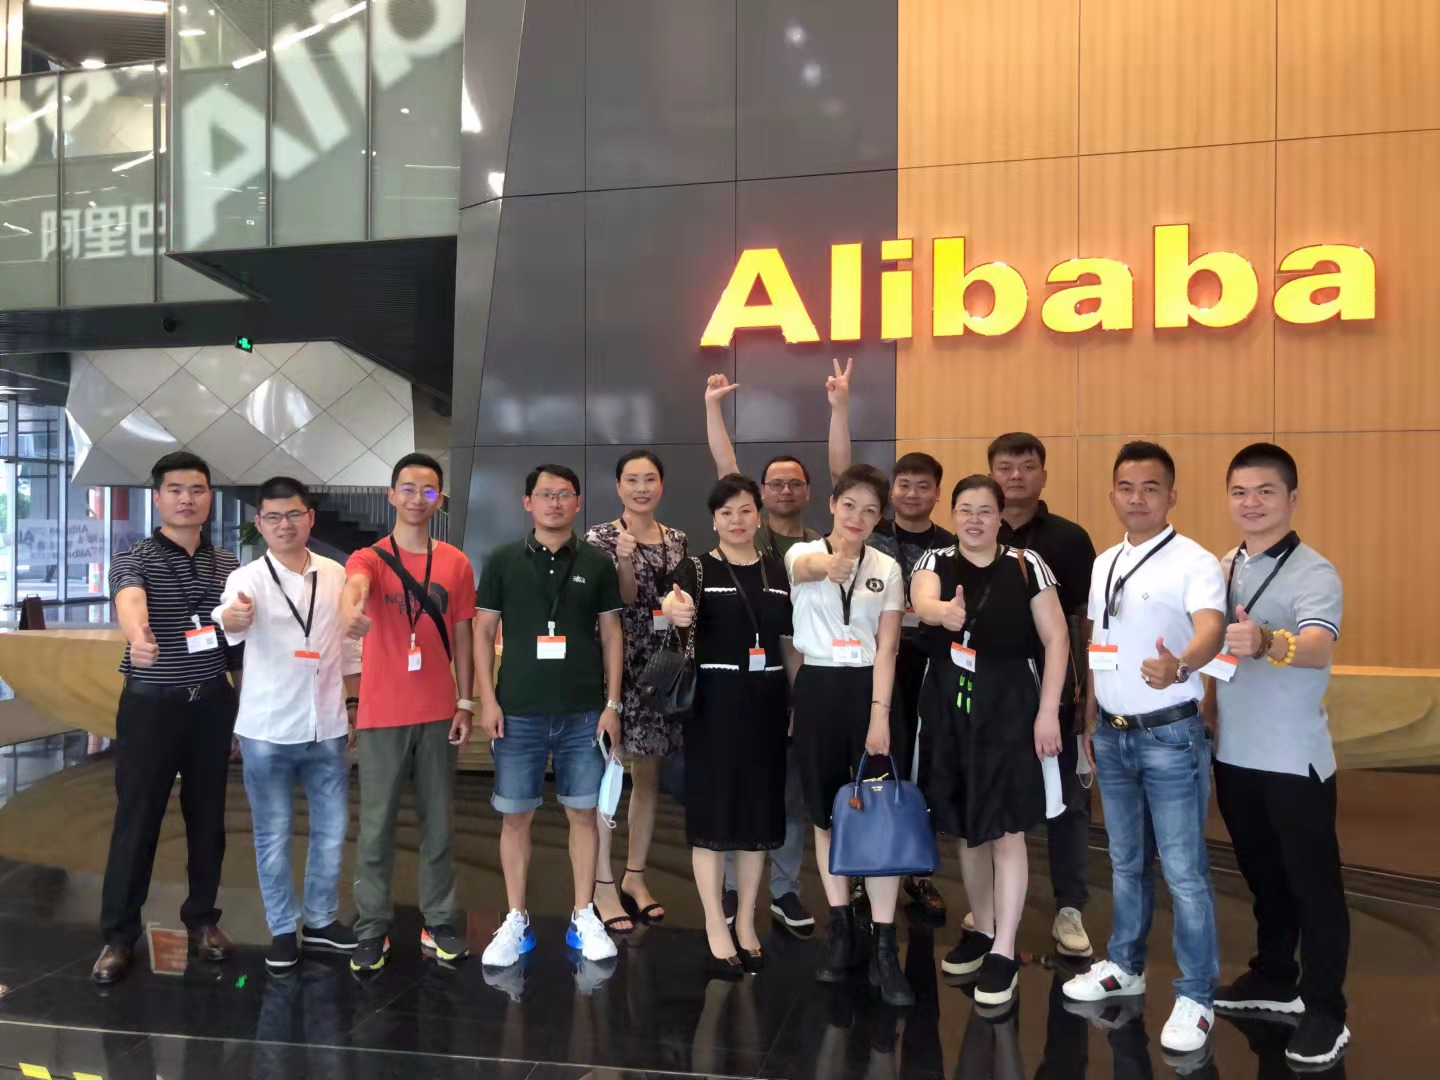 KRD Chen Yunbo, general manager, visits group headquarters in Alibaba with Zhejiang University EMBA students